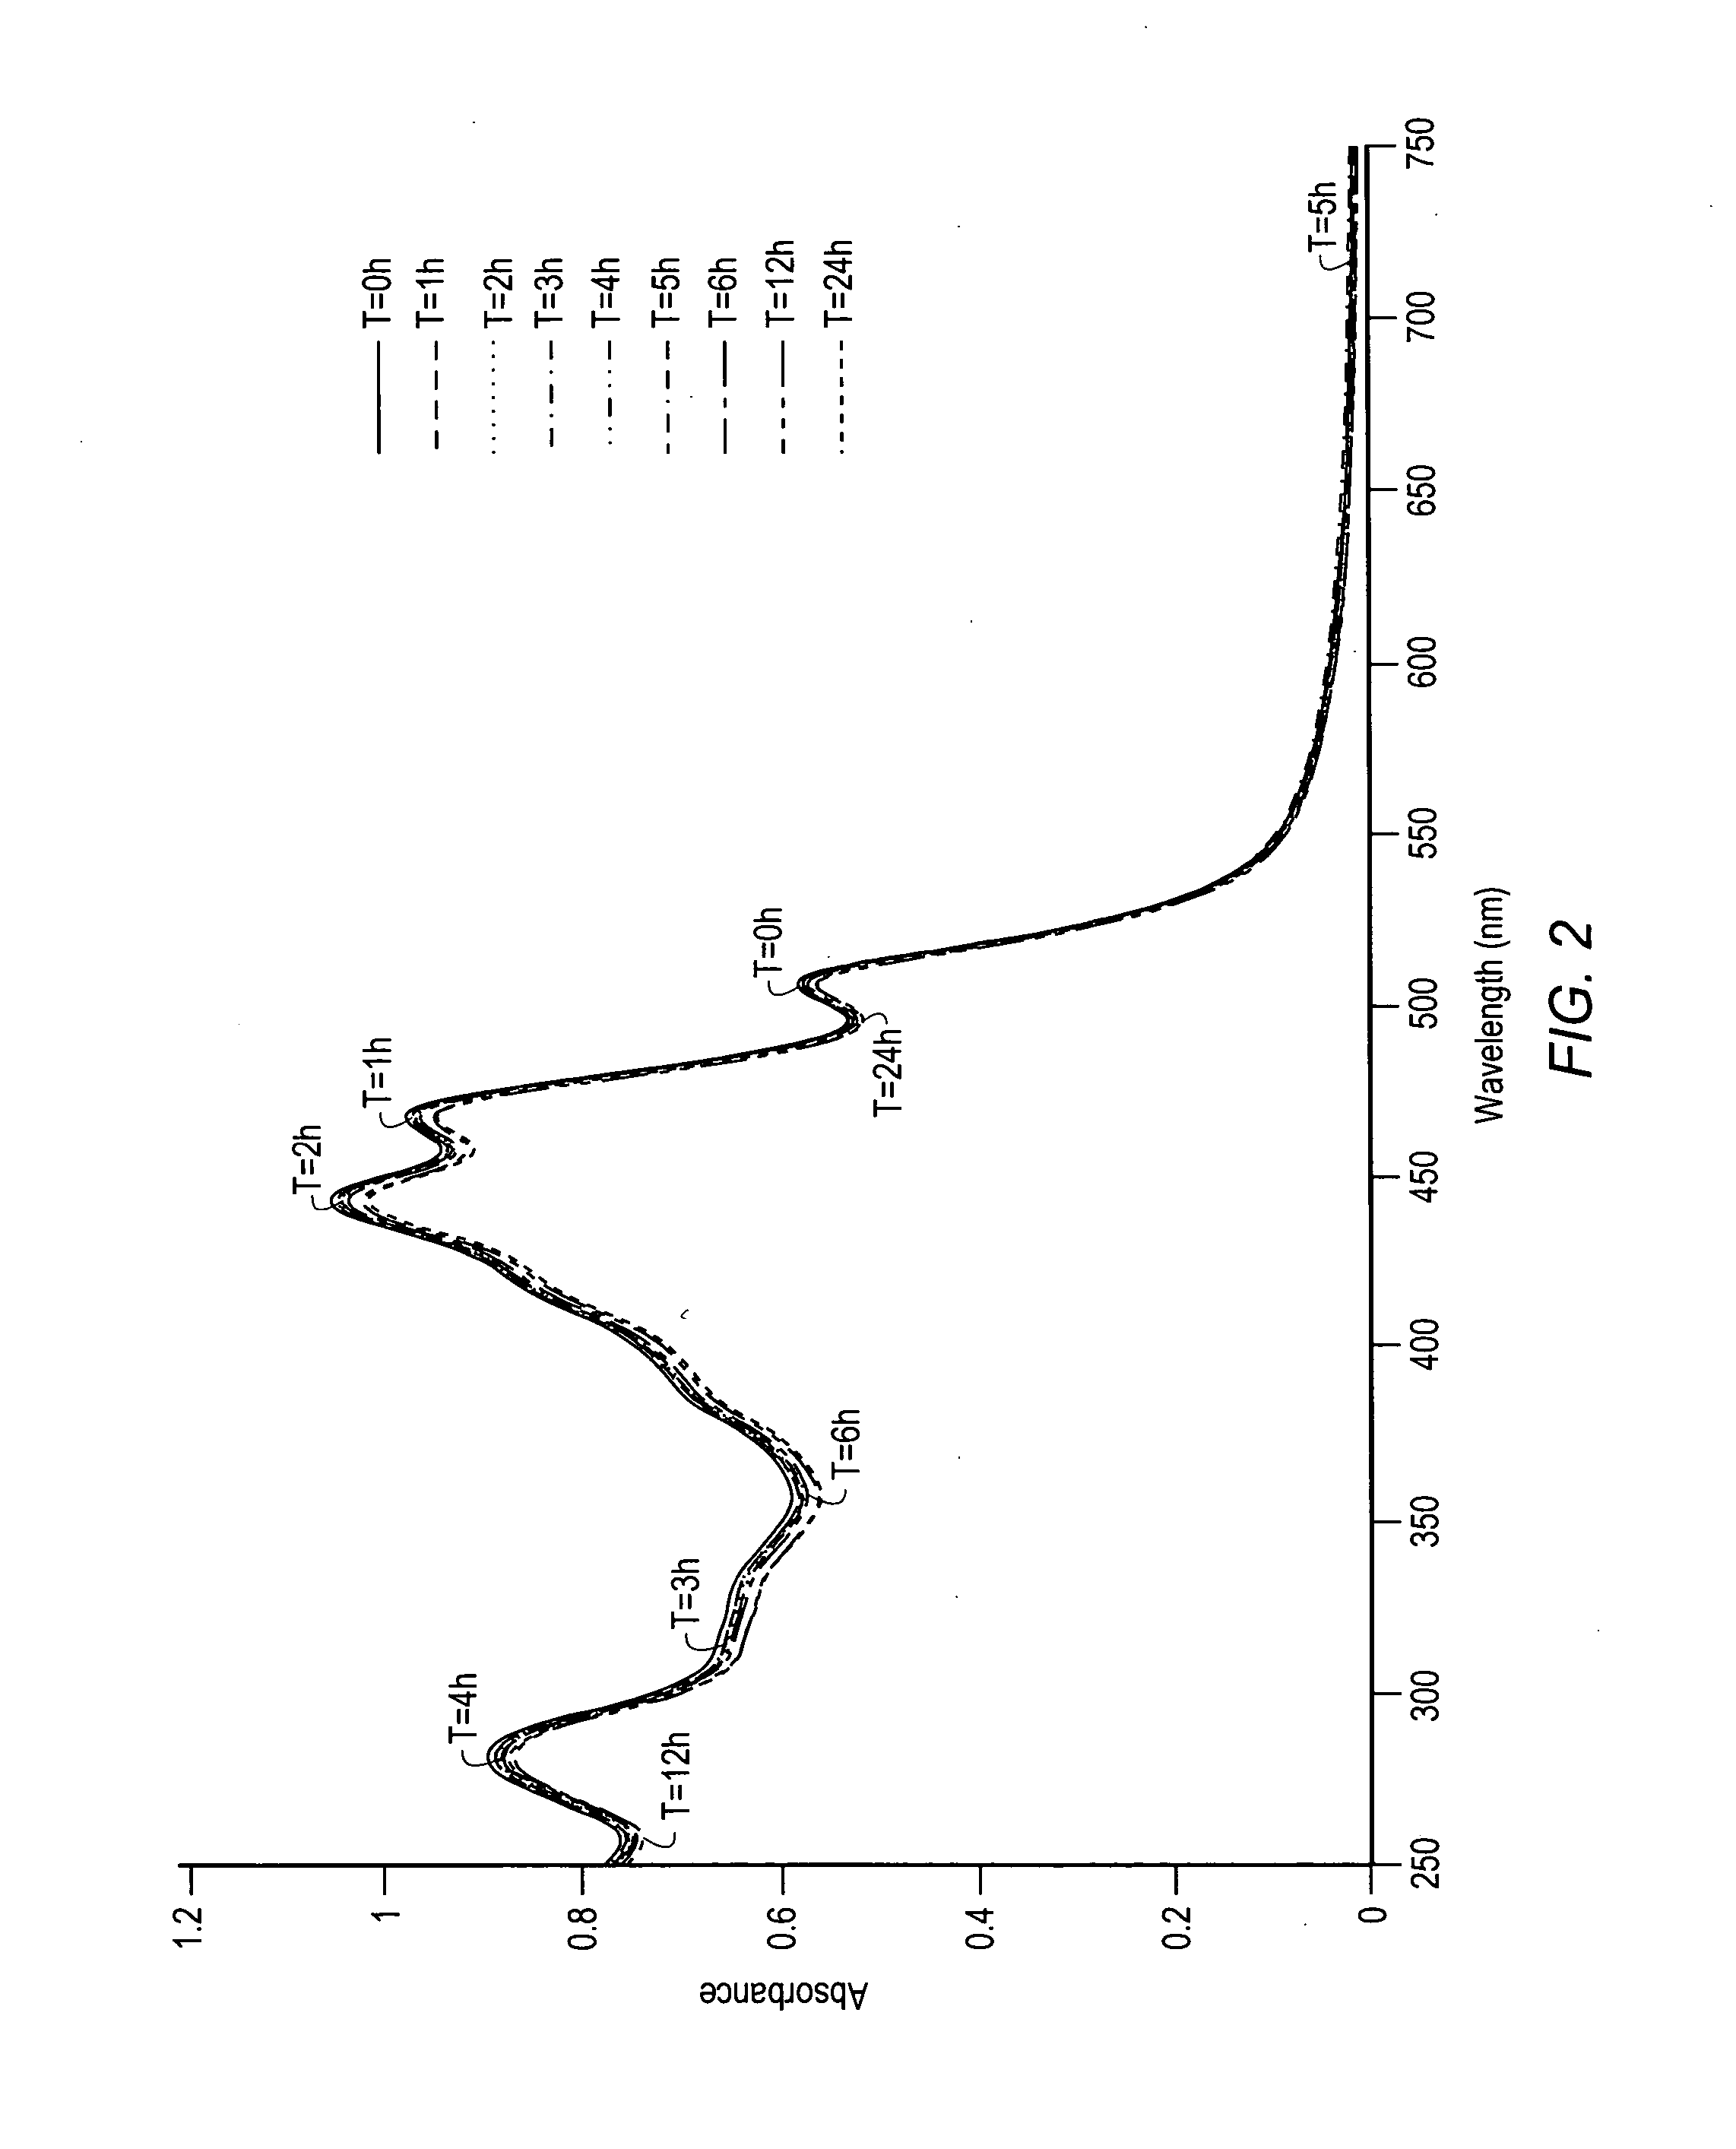 Water-dispersible carotenoids, including analogs and derivatives